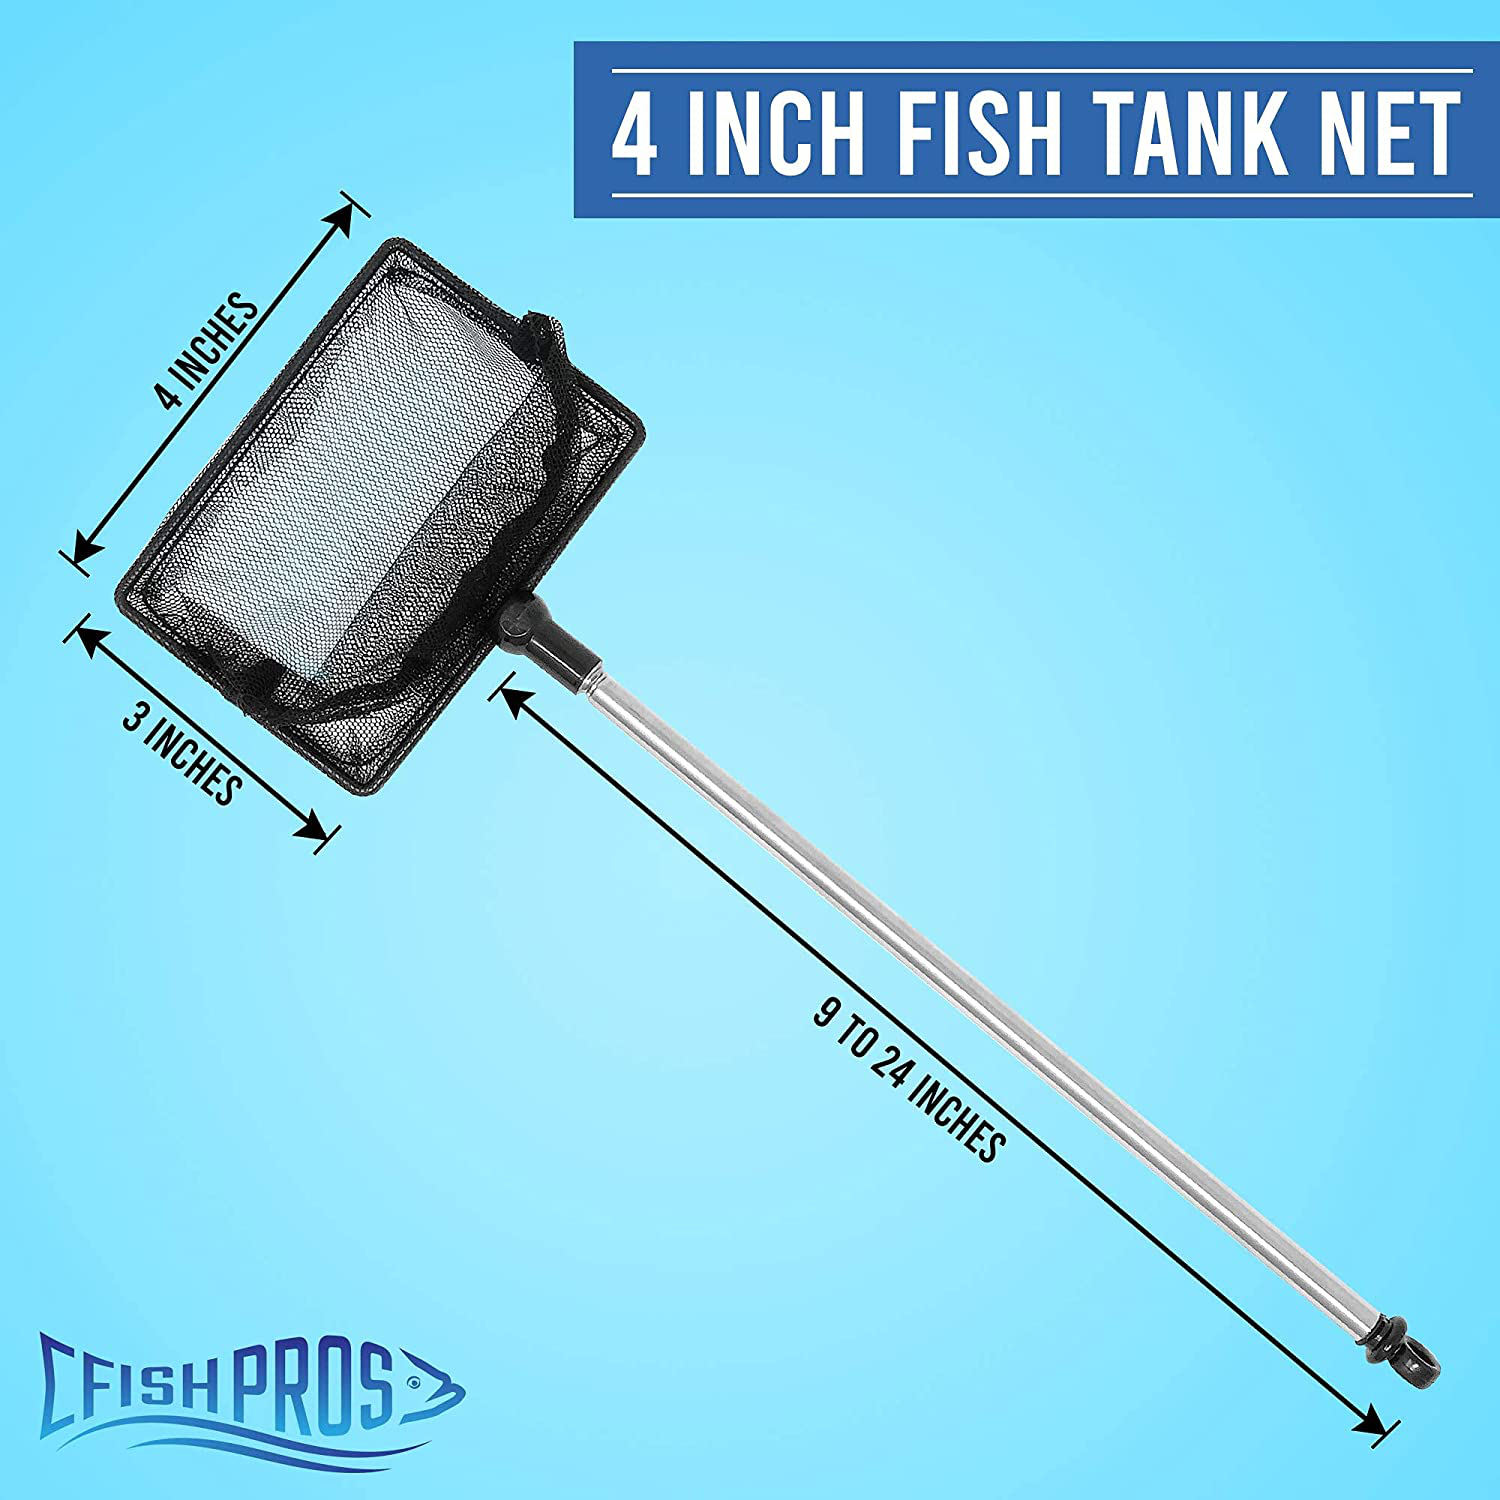 FISH PROS Fish Net for Fish Tank - 2.5 Inch Deep Mesh Scooper with